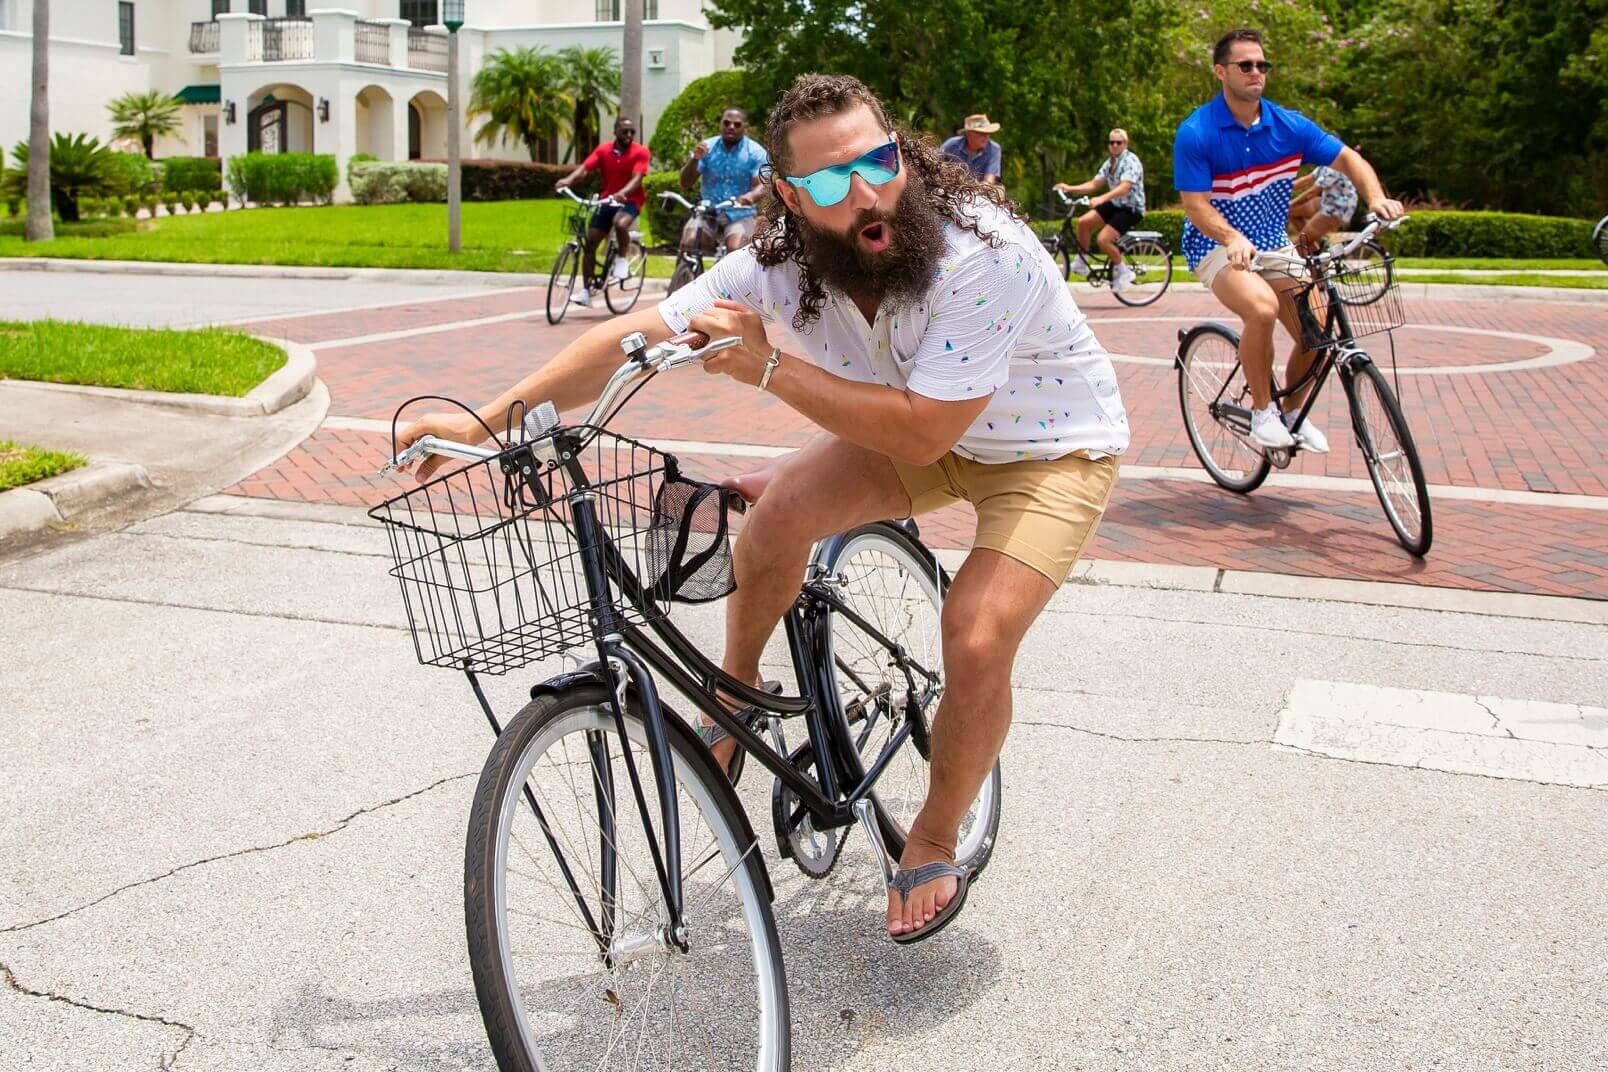 A man in flip-flops, khaki shorts, and a white shirt aggressively rides a bike, showing you can be very active while wearing Chubbies.